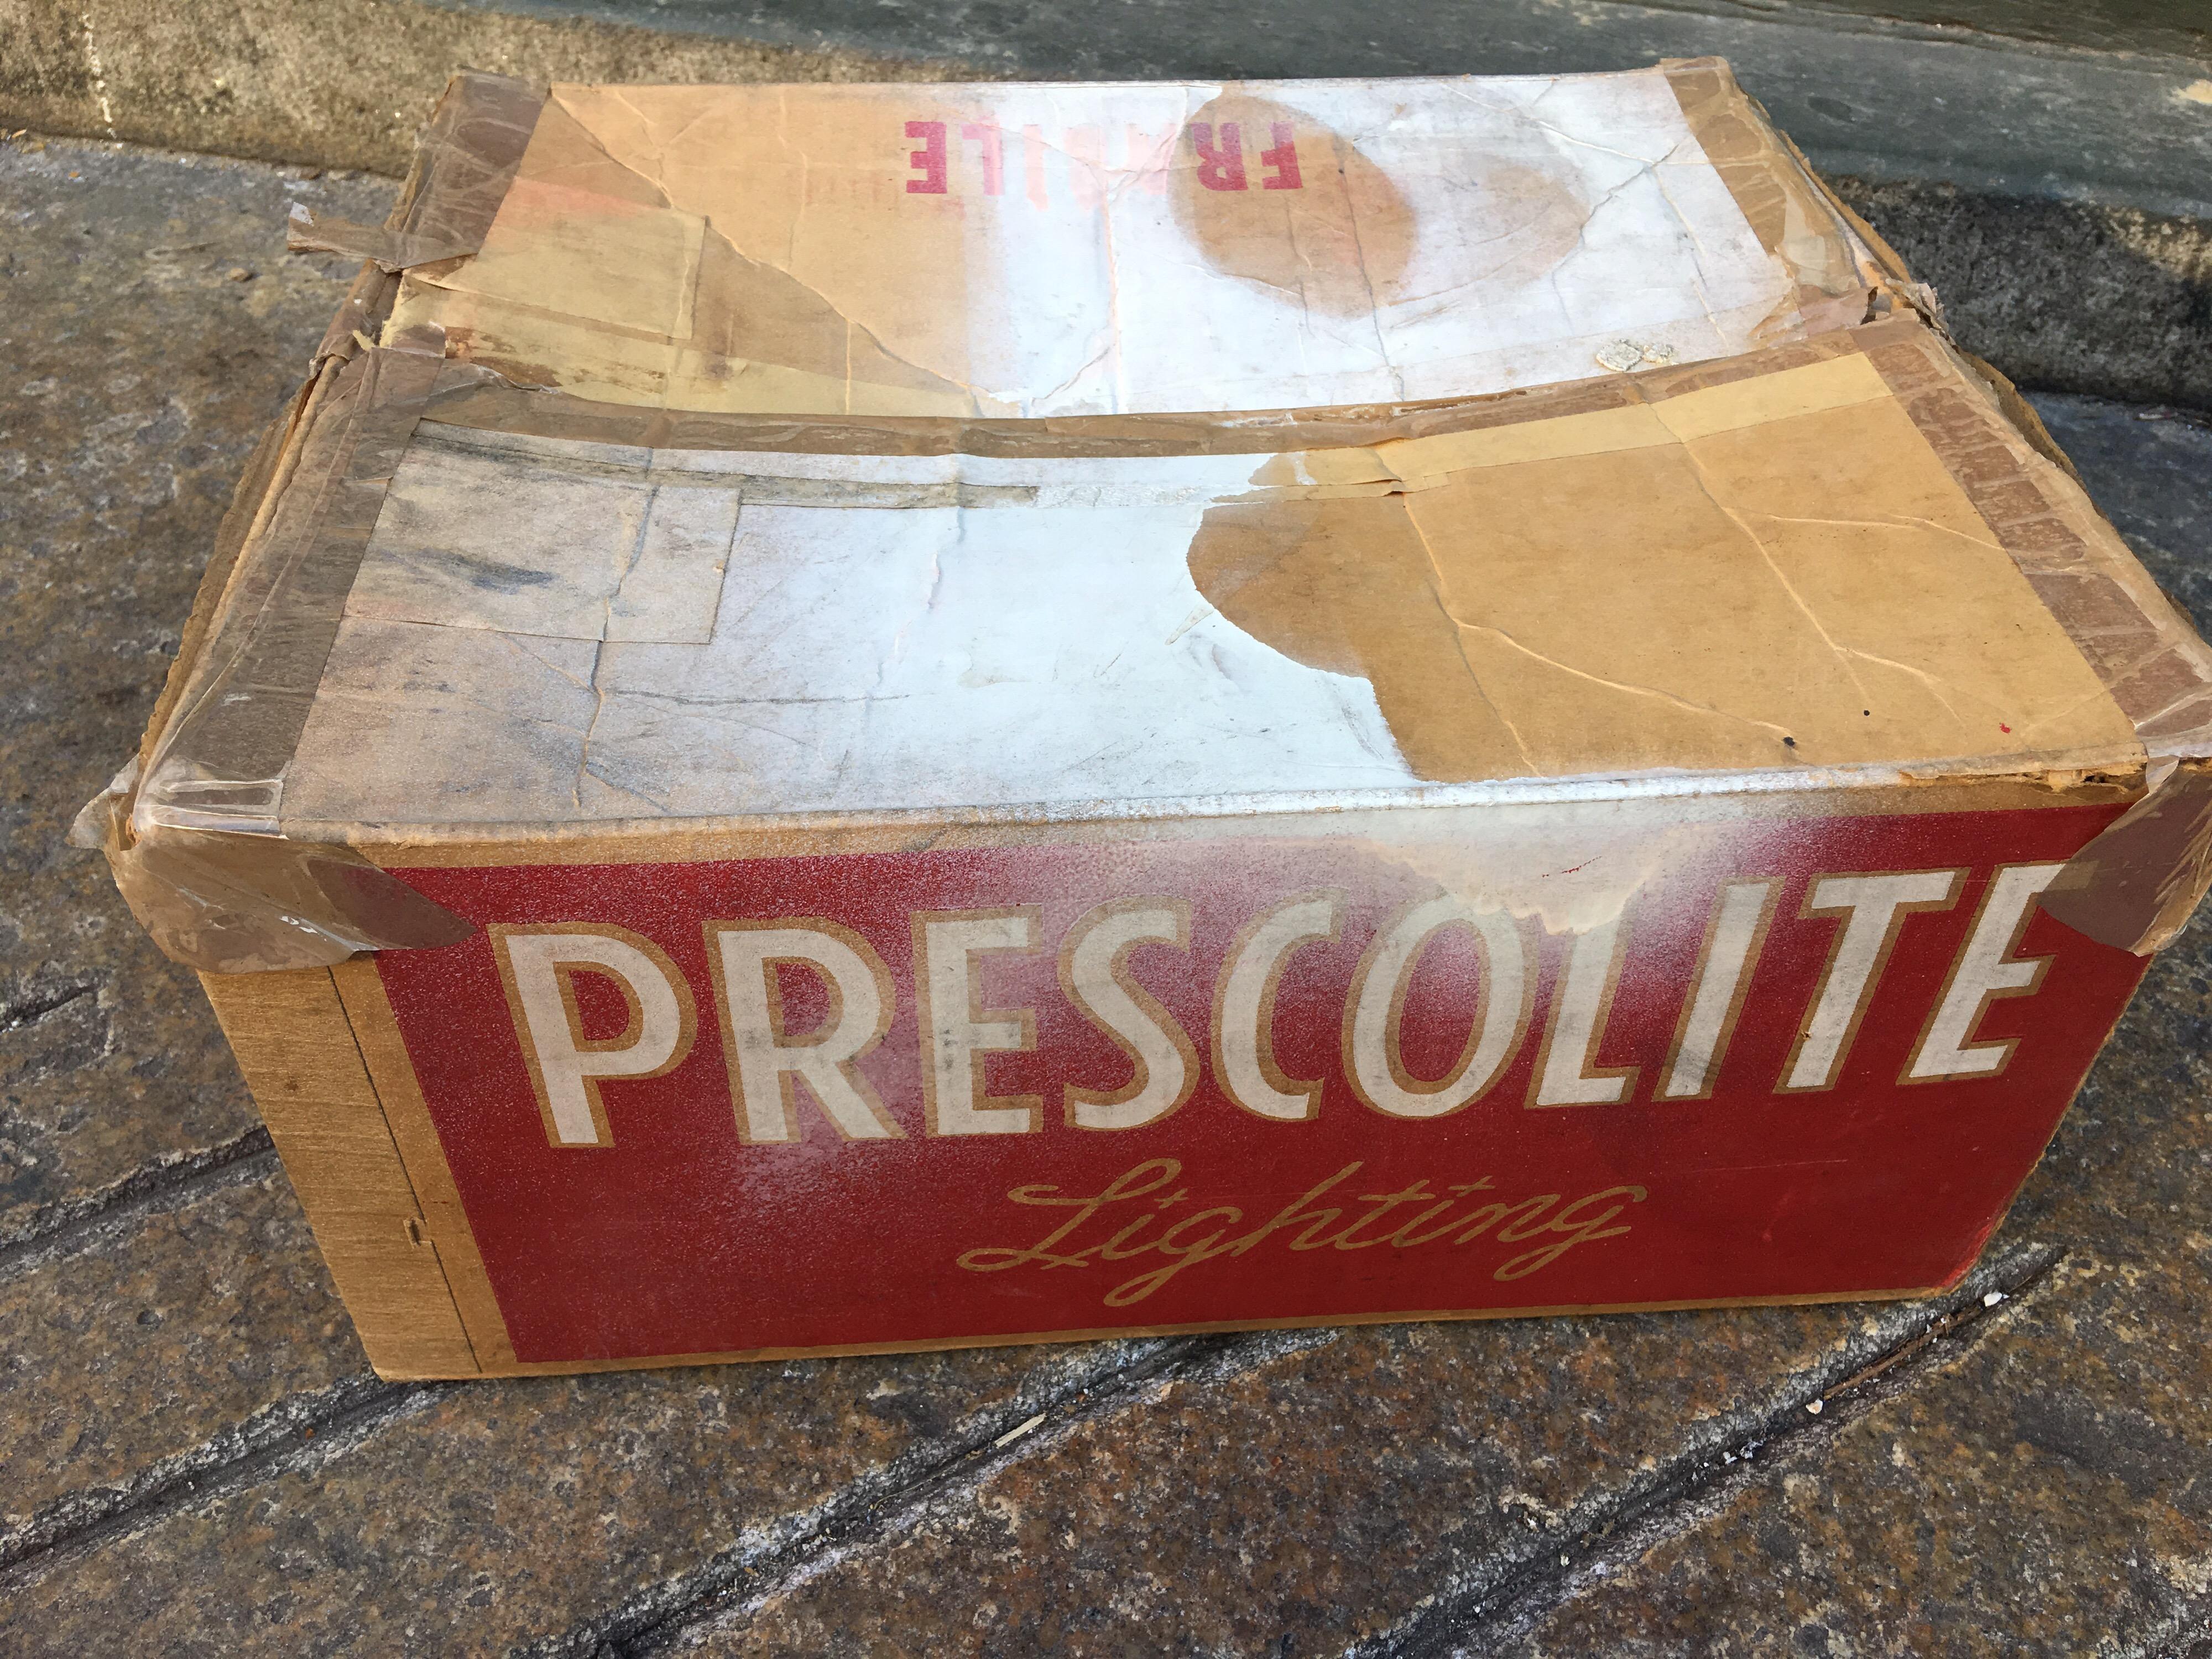 Mid-Century Modern Prescolite exit sign  New Old Stock with box!